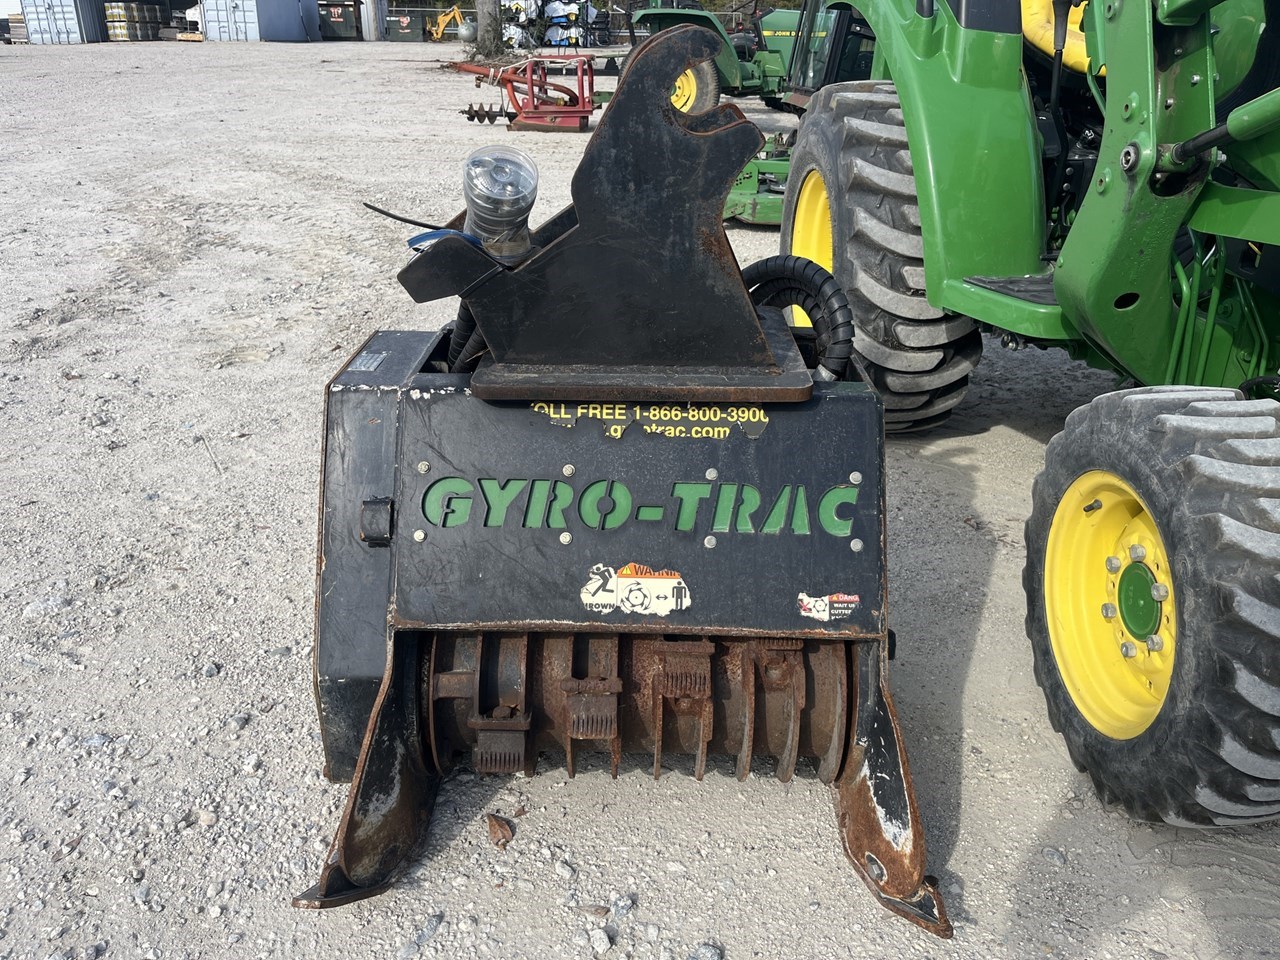 GyroTrac 300 BX Attachments For Sale